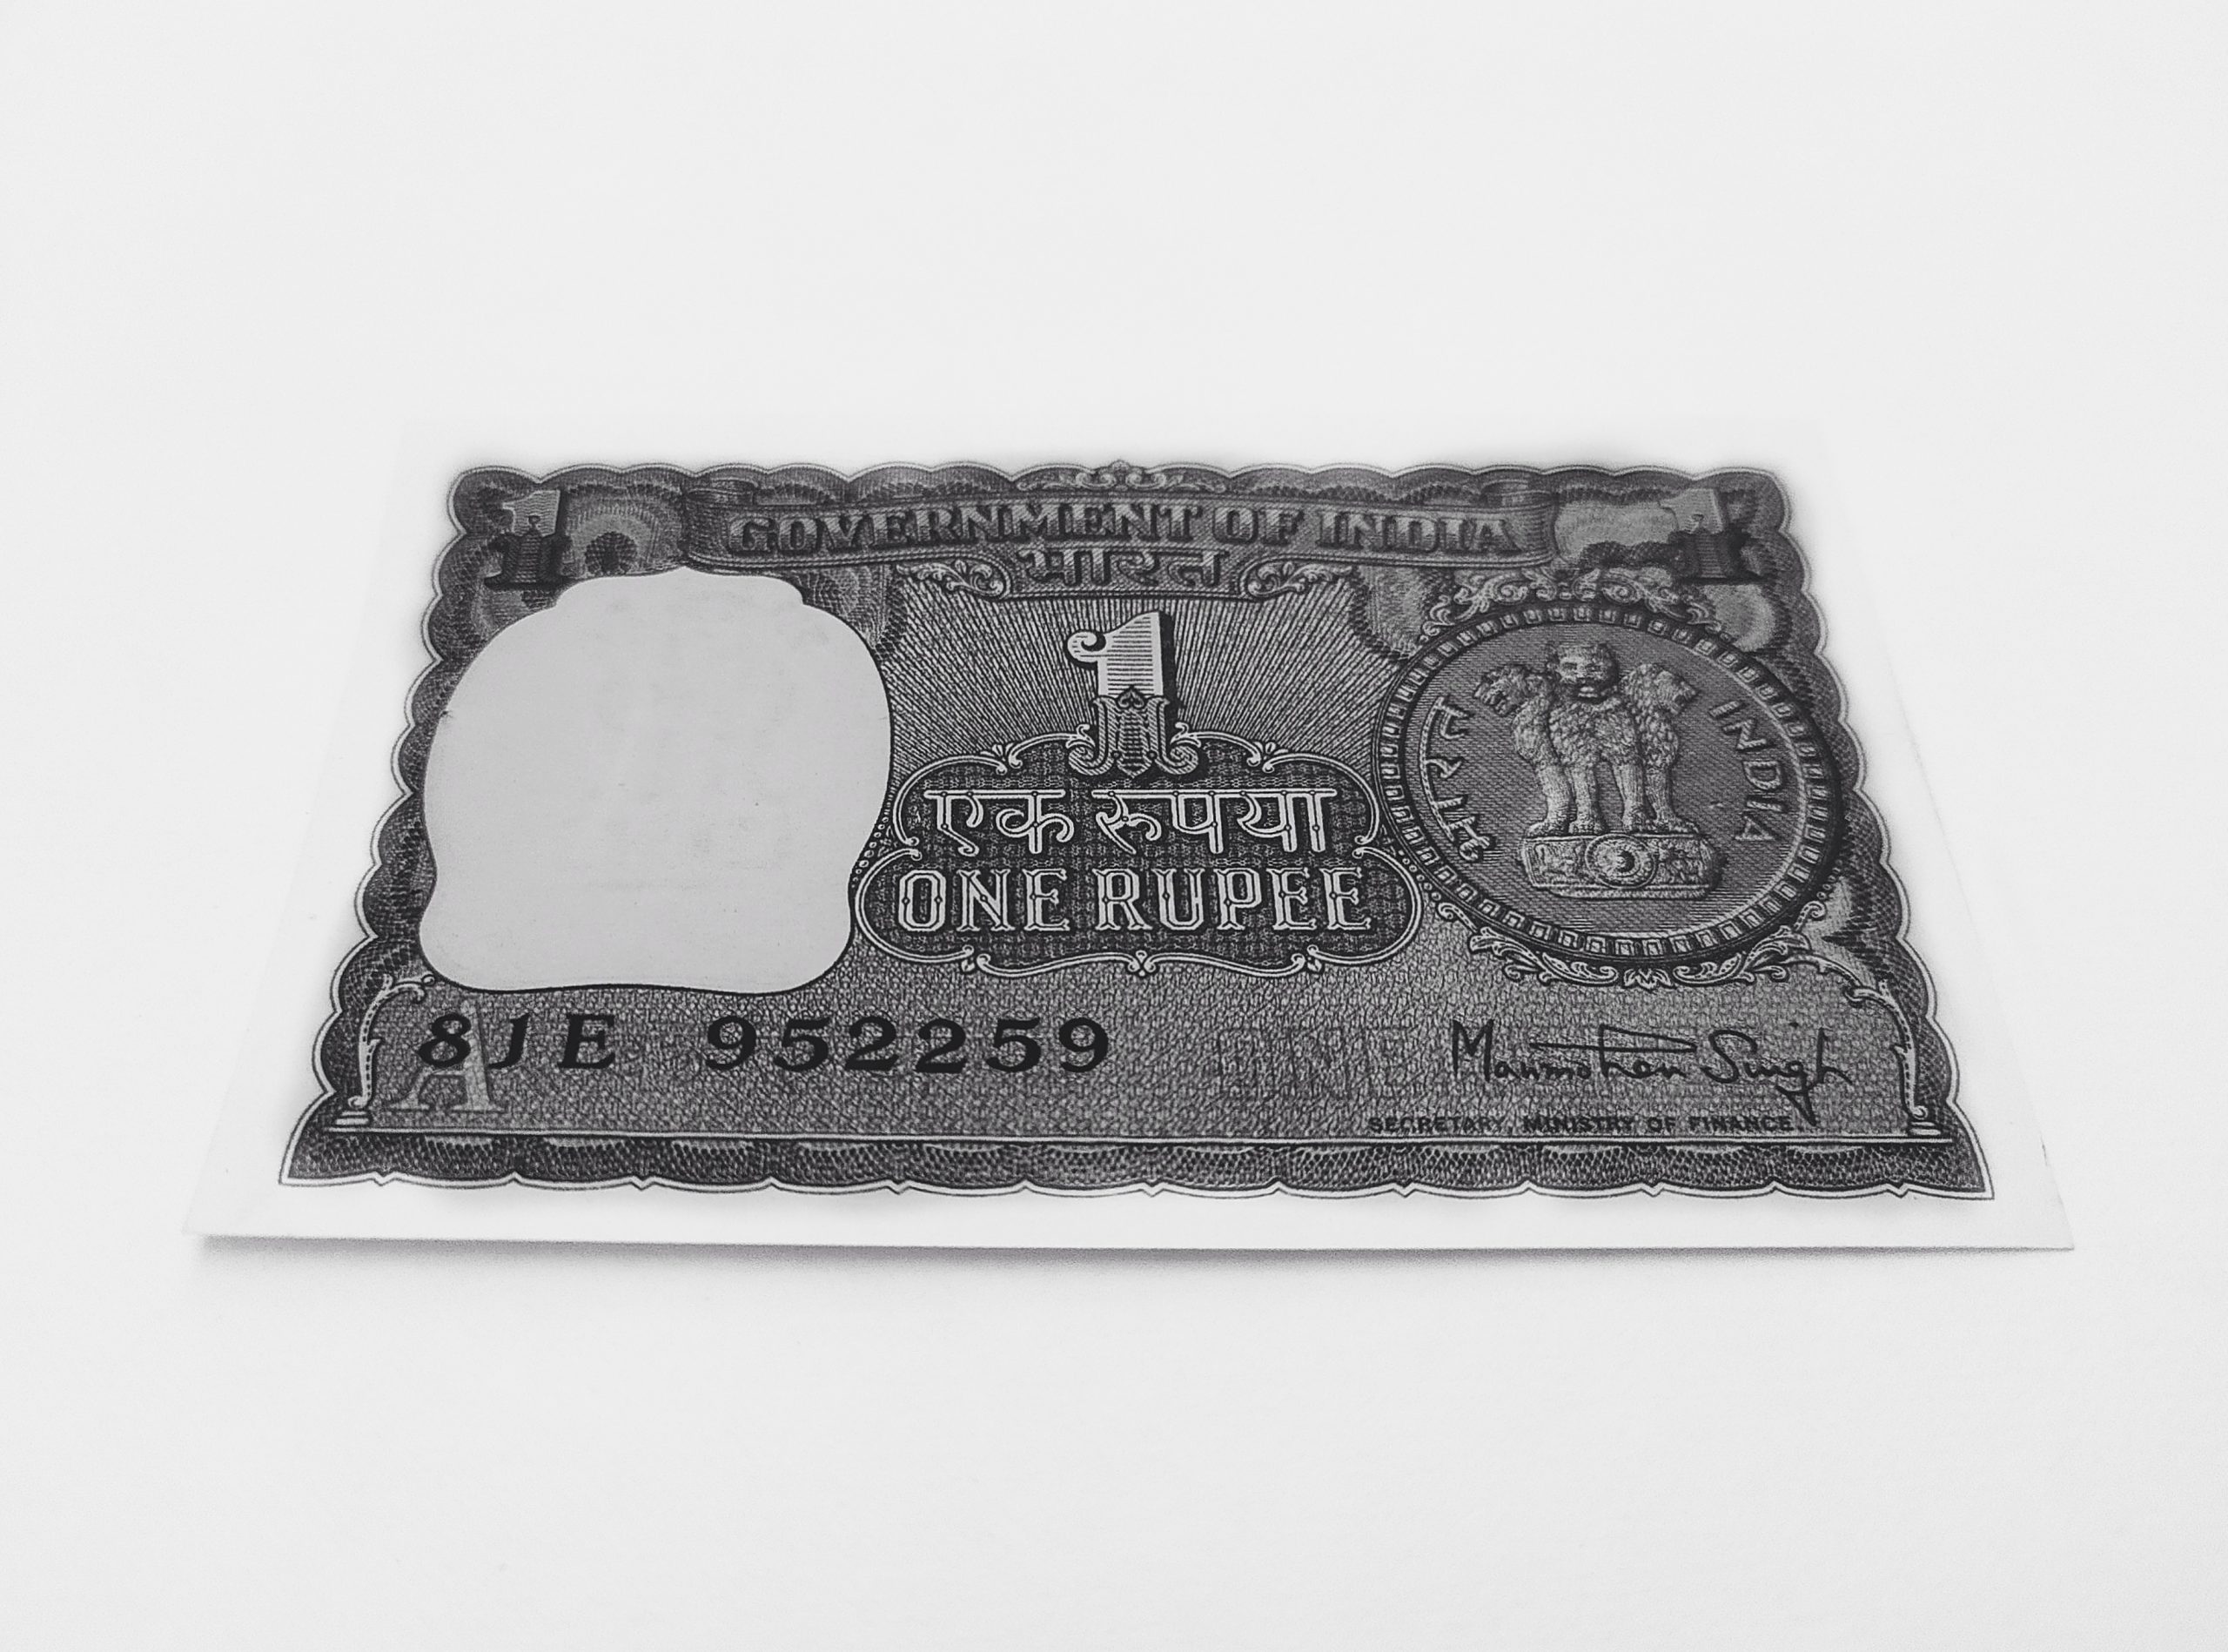 One rupee note